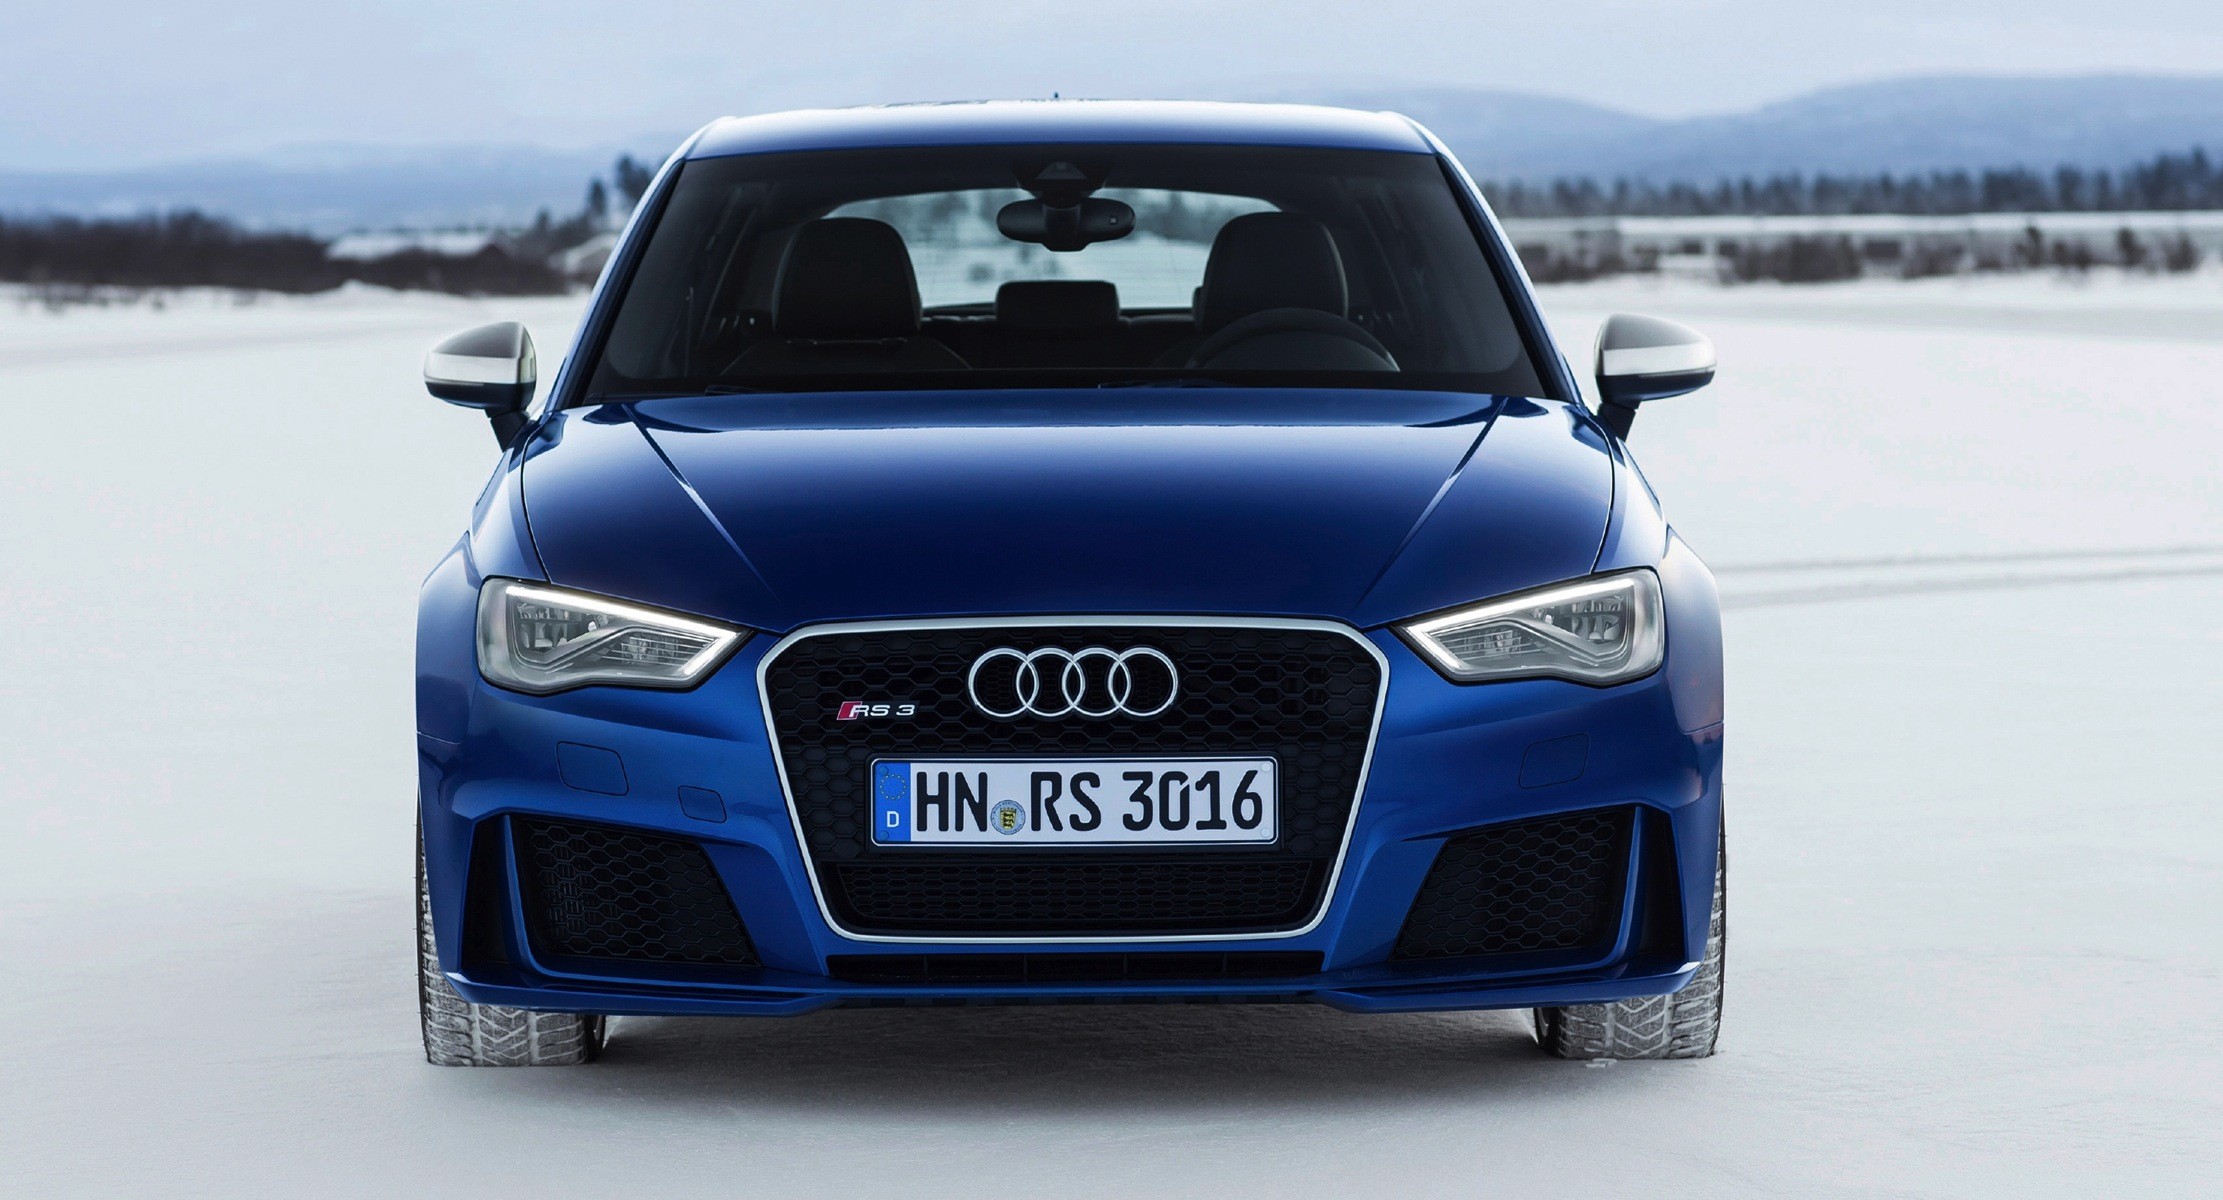 2015-audi-rs3-new-photos-show-sepang-blue-color-photo-gallery_1.jpg